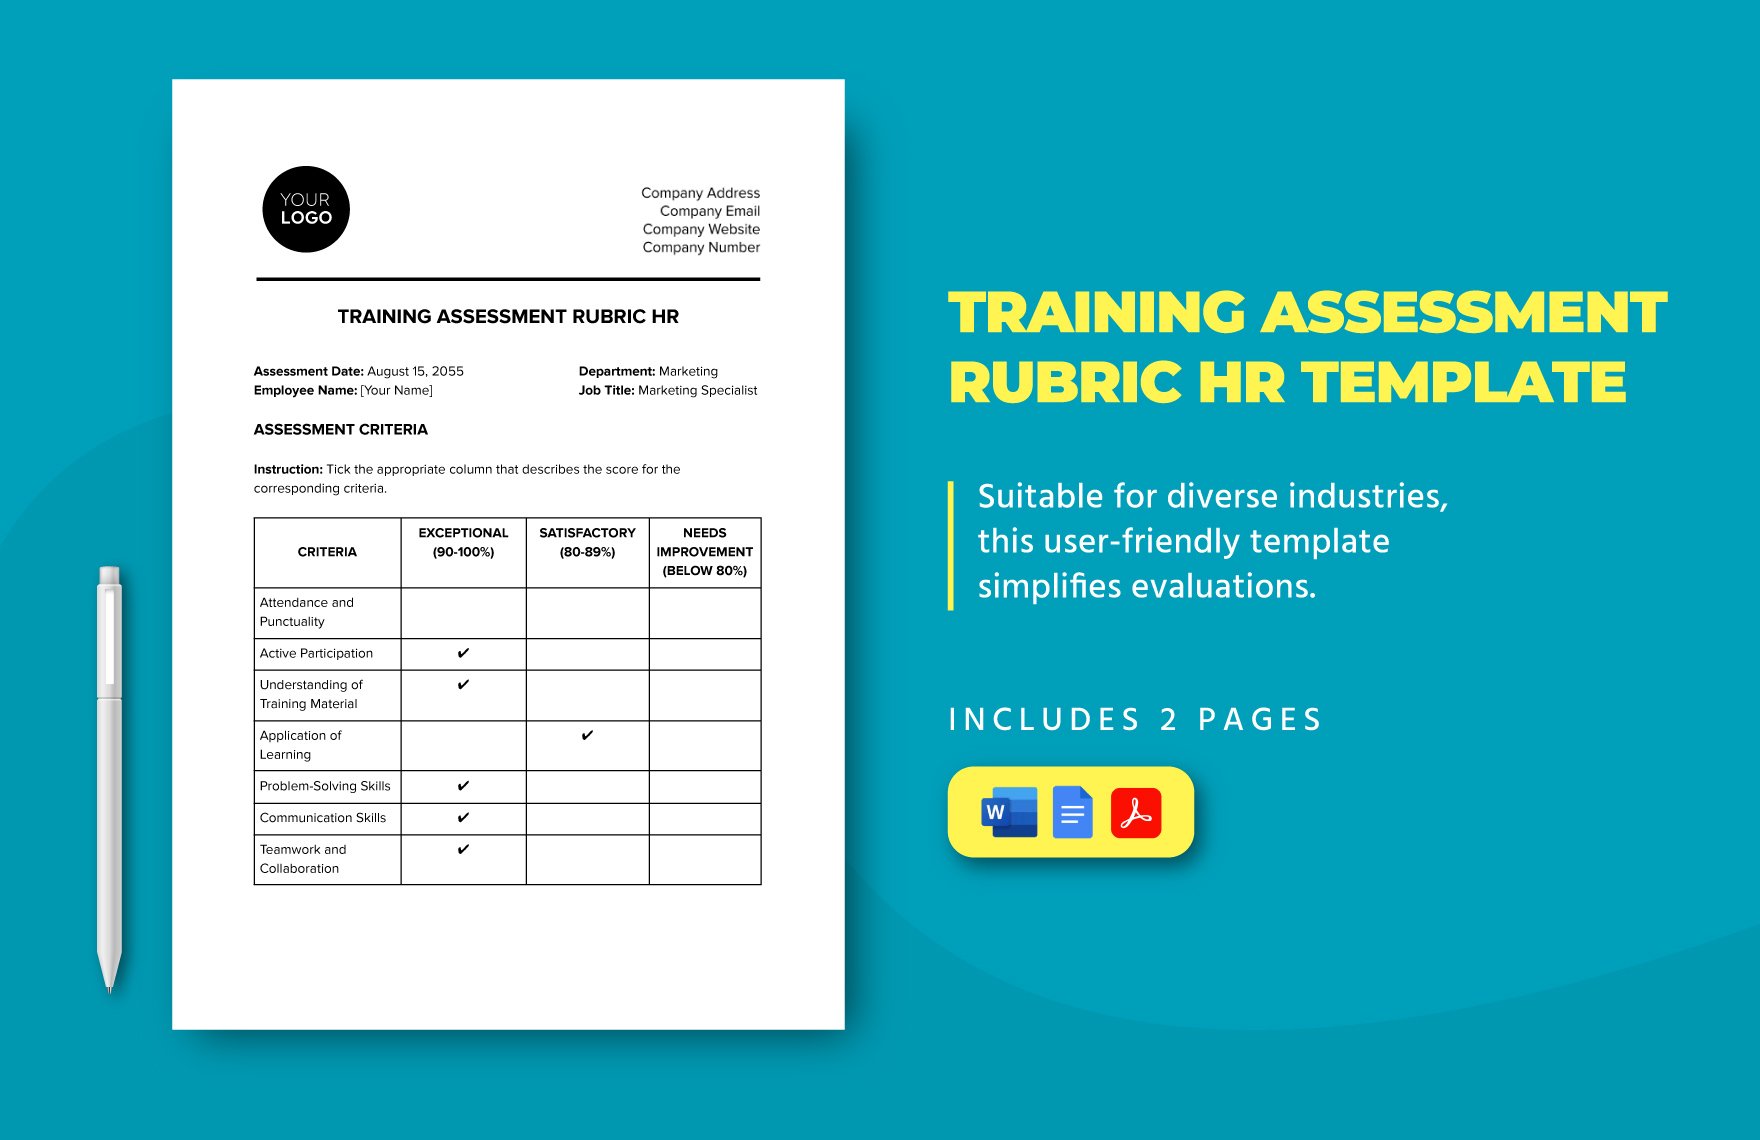 Training Assessment Rubric HR Template in Word, Google Docs, PDF